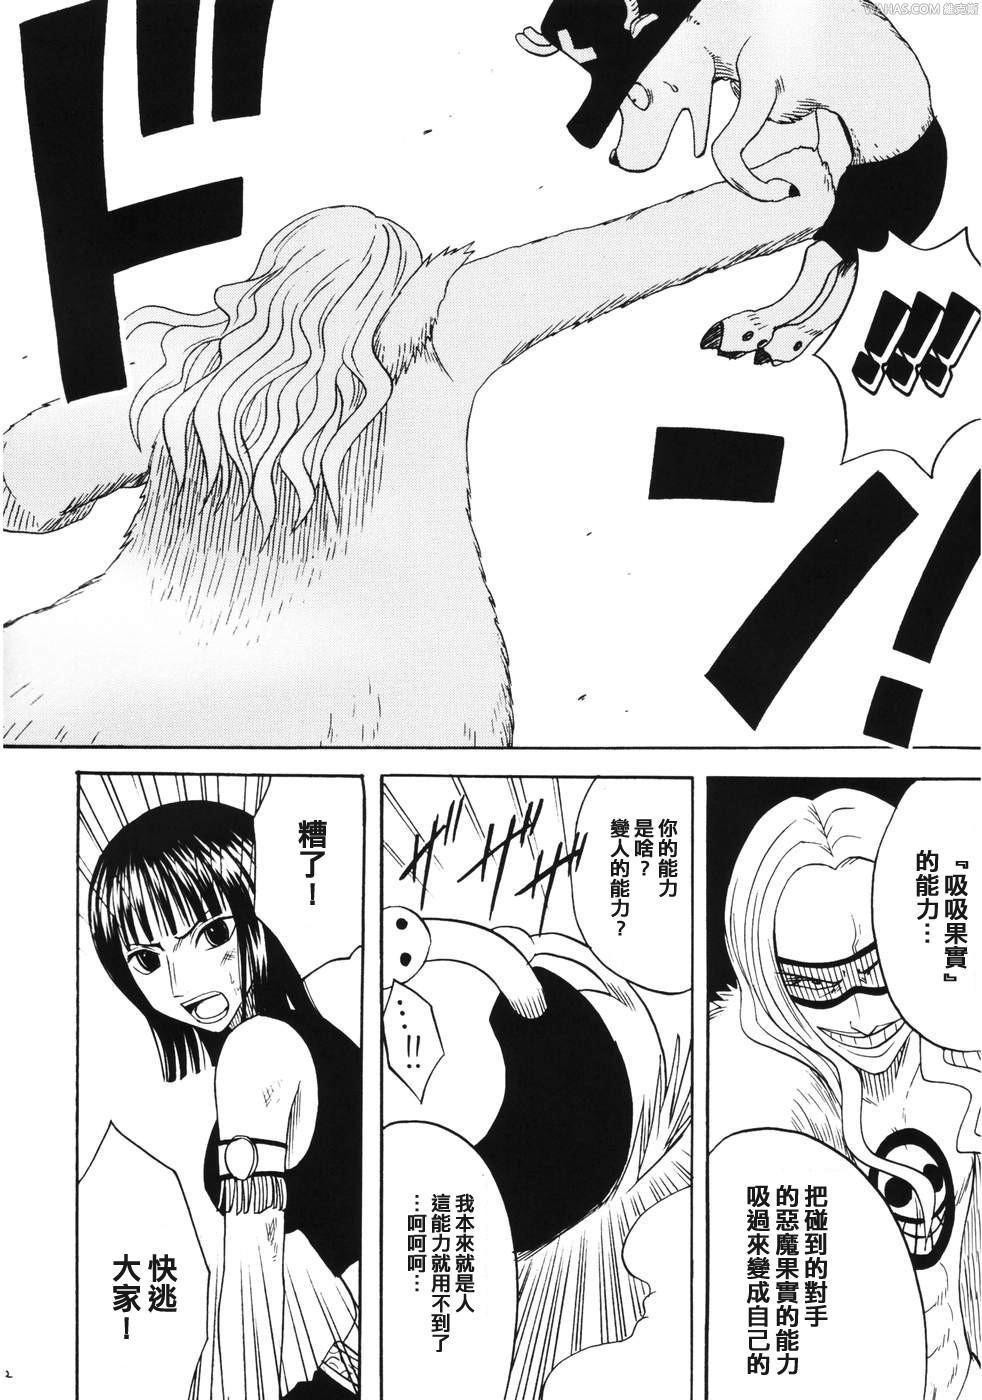 Mexicano Dancing Animation Run - One piece Pure18 - Page 11